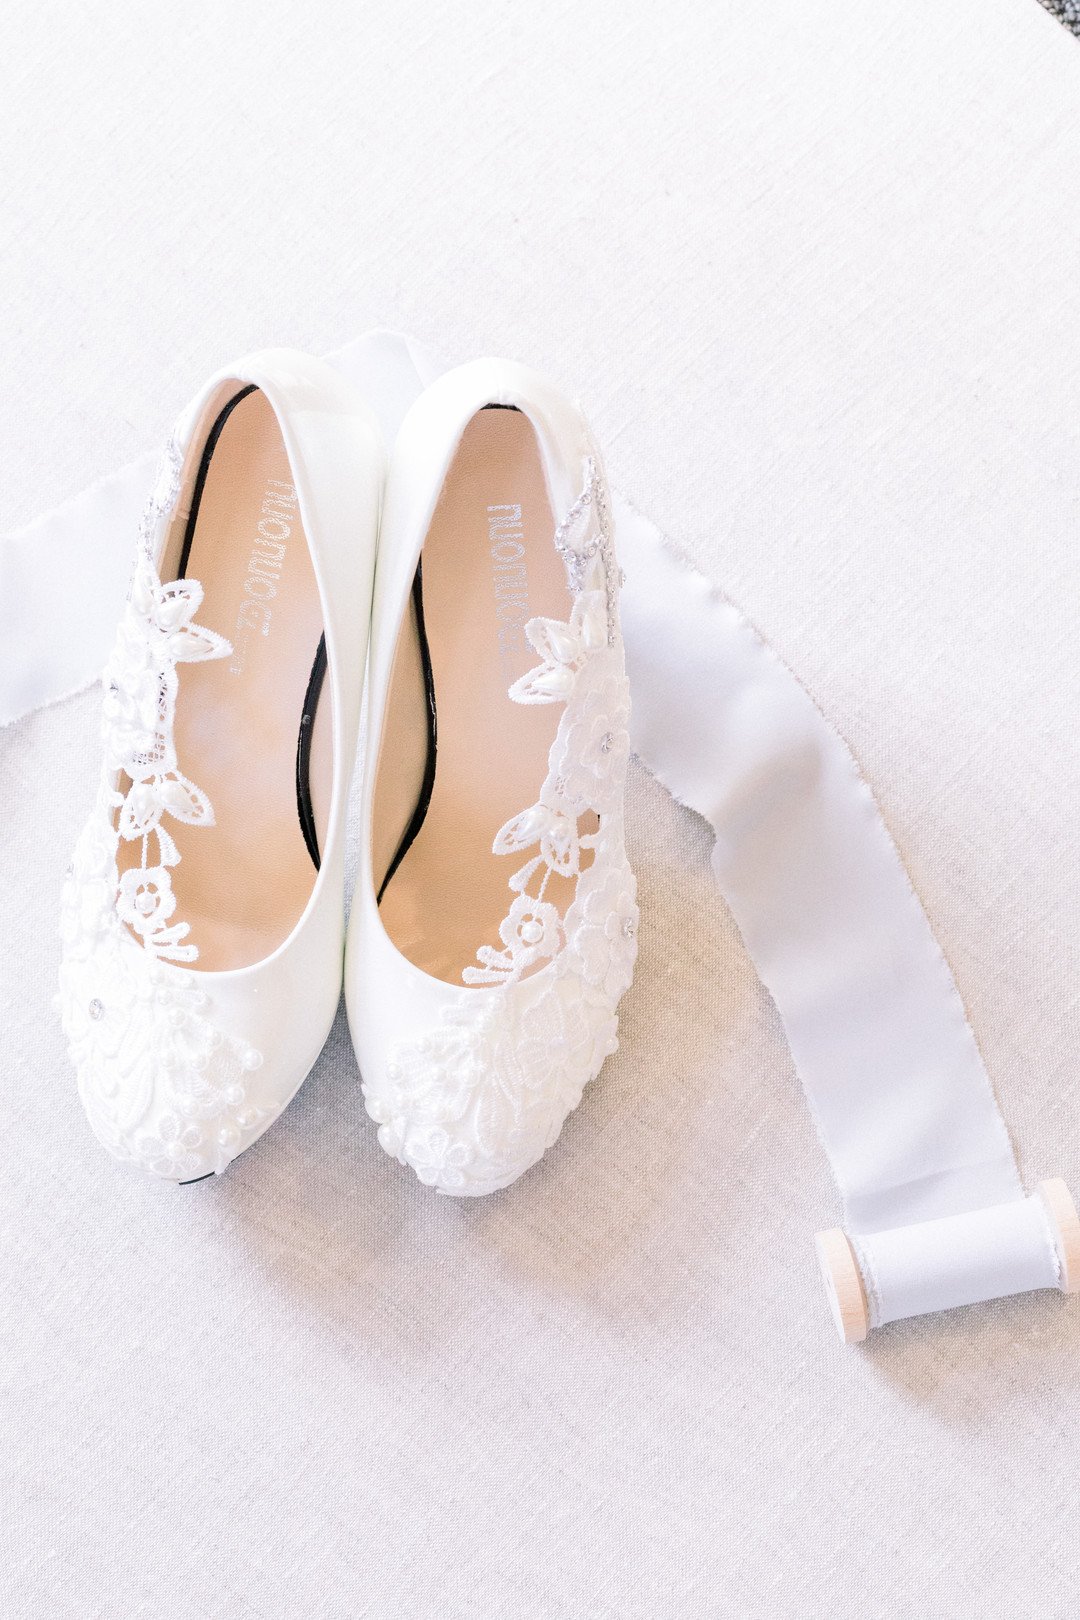 www.santabarbarawedding.com | Three16 Photography | Embassy Suites by Mandalay Beach Resort | One Sweet Day | Bride’s Shoes